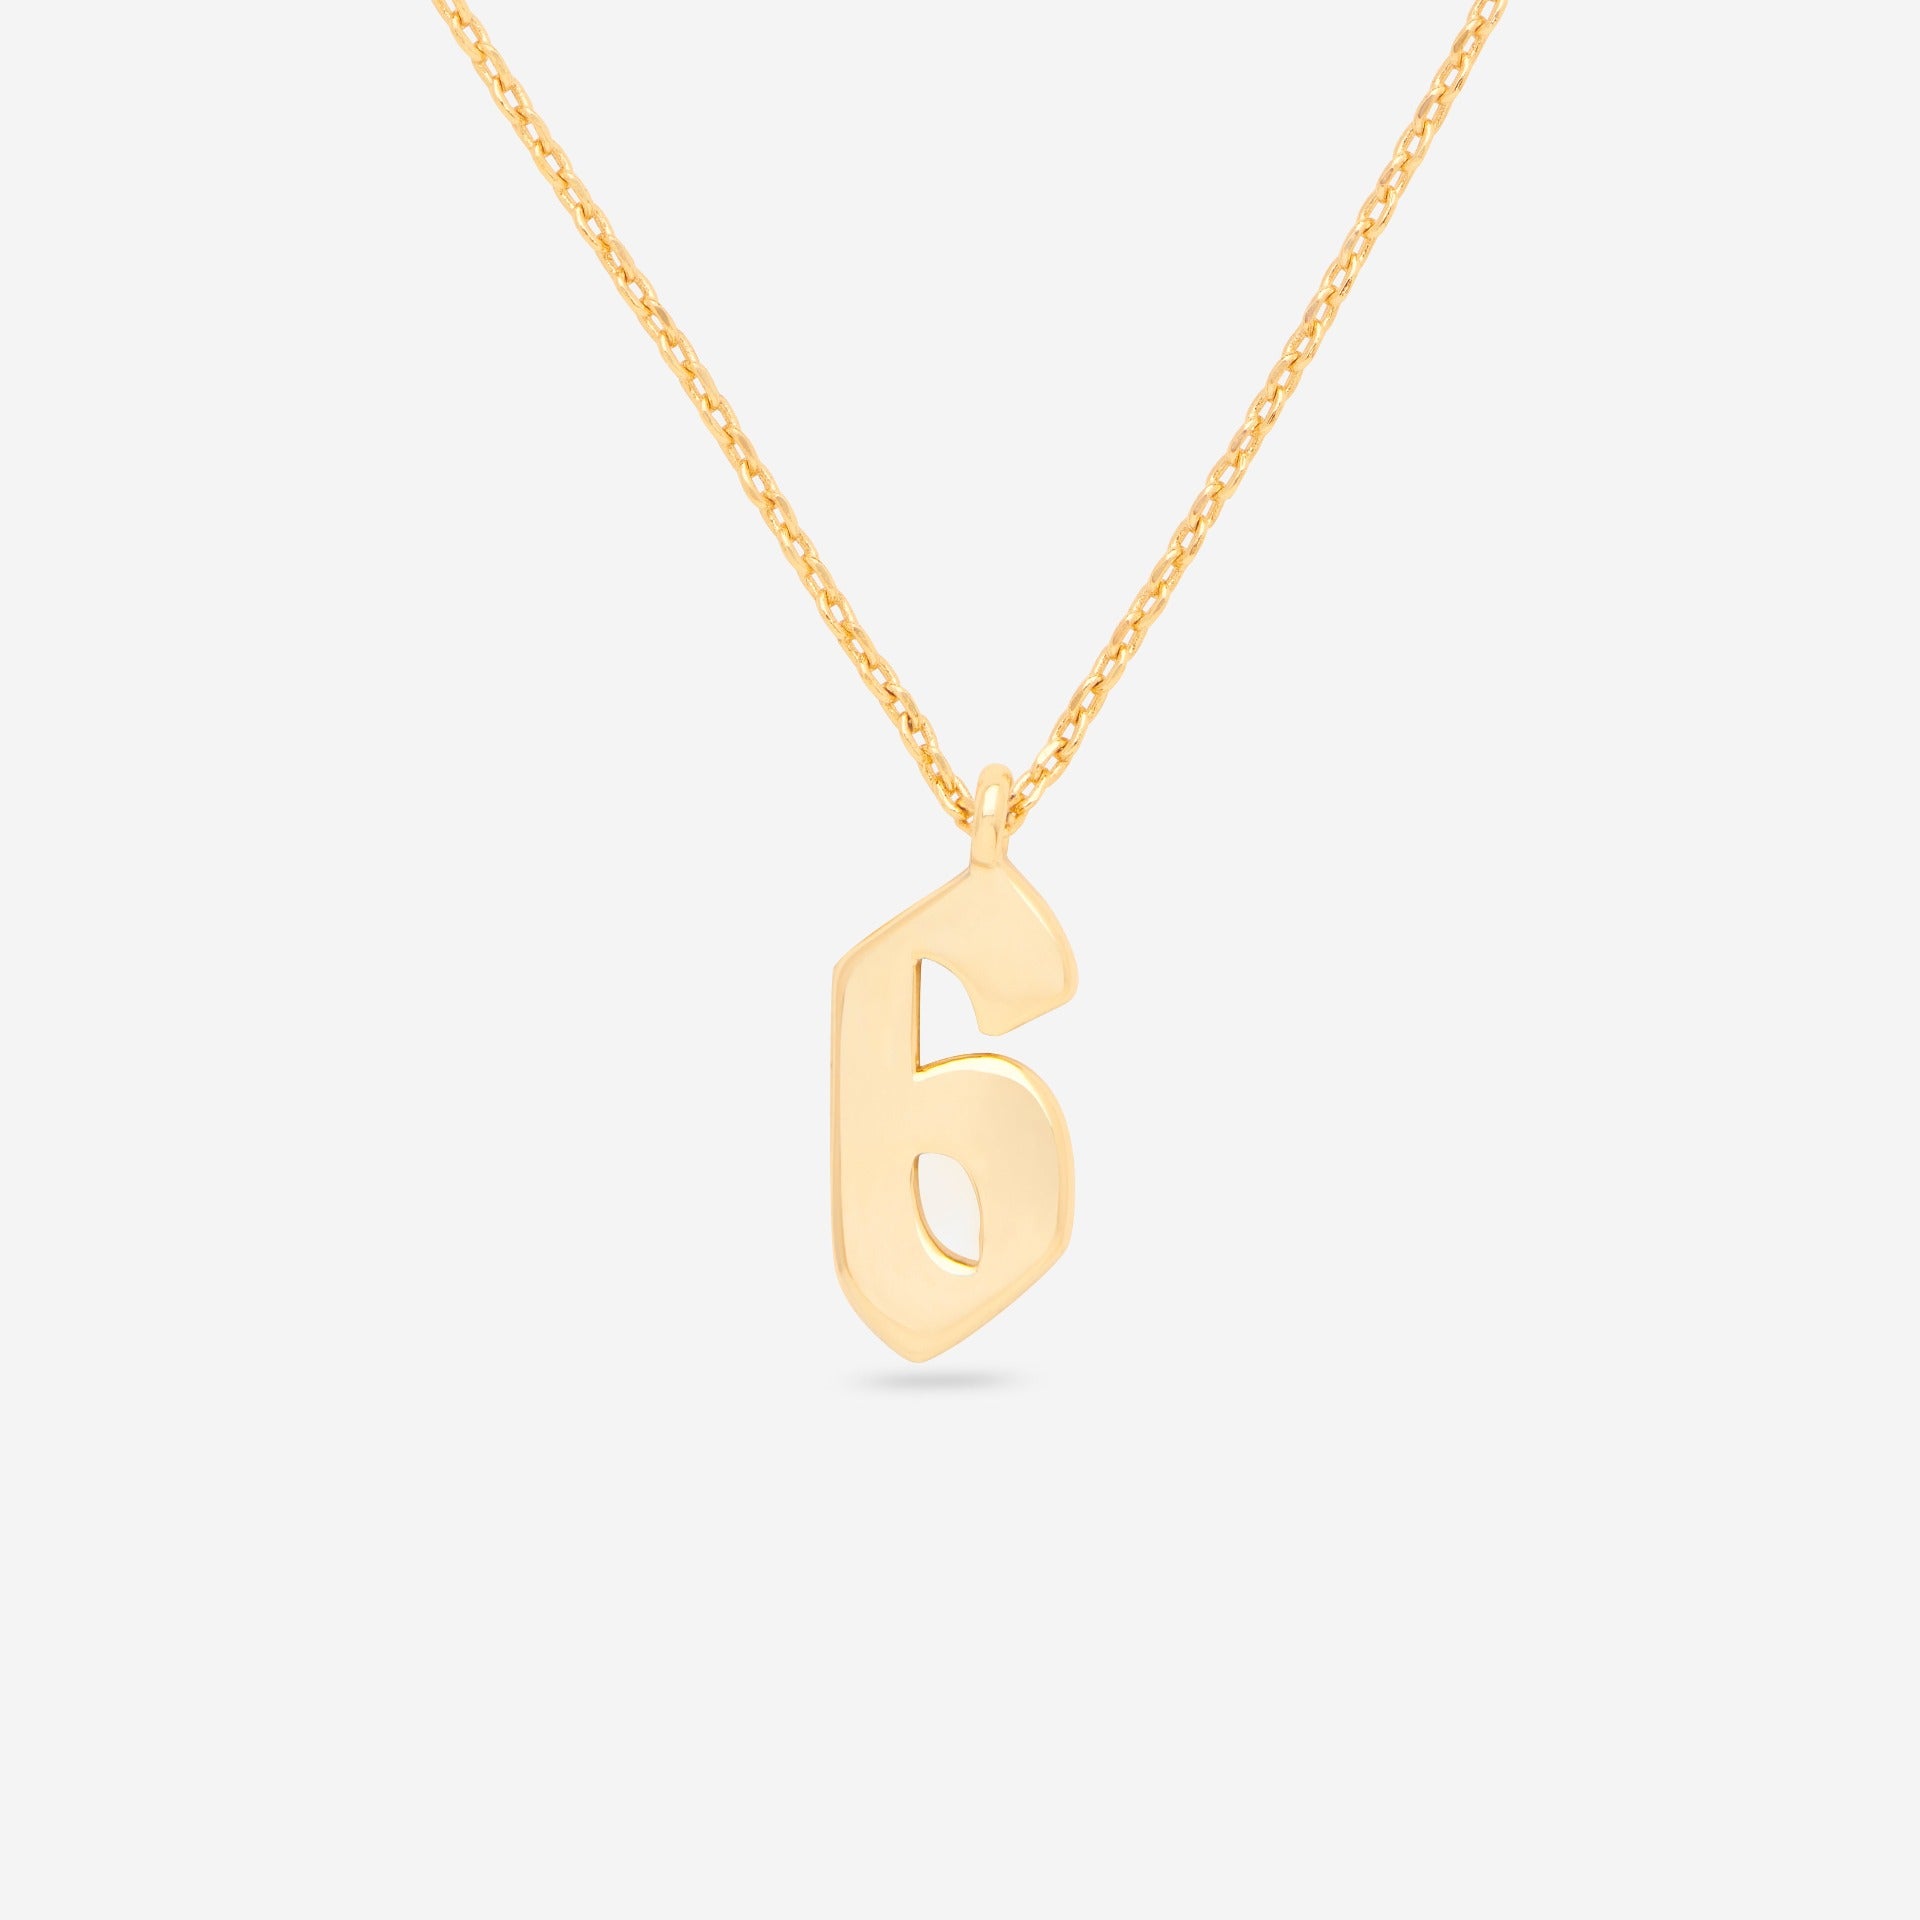 Number 6 Pendant Necklace